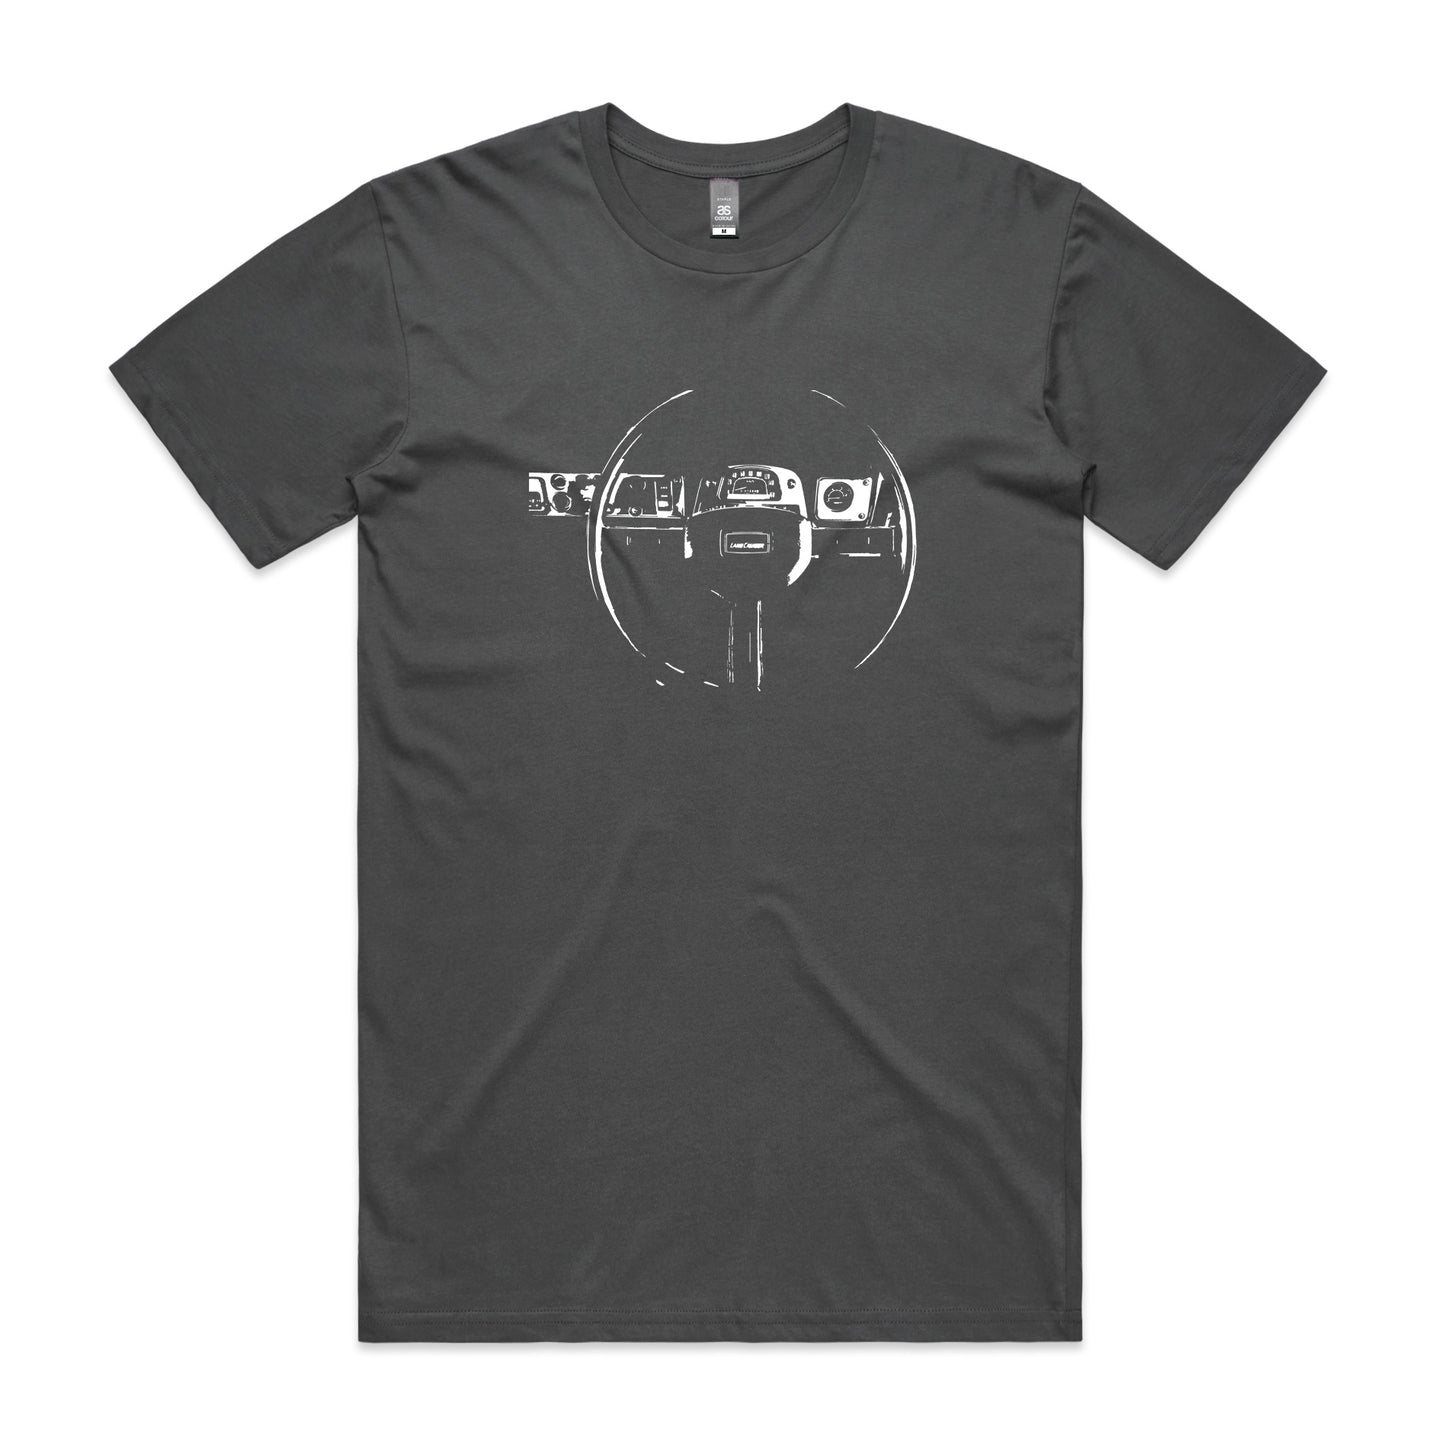 FJ40 dash t-shirt in dark grey with a Toyota LandCruiser dashboard printed on the front